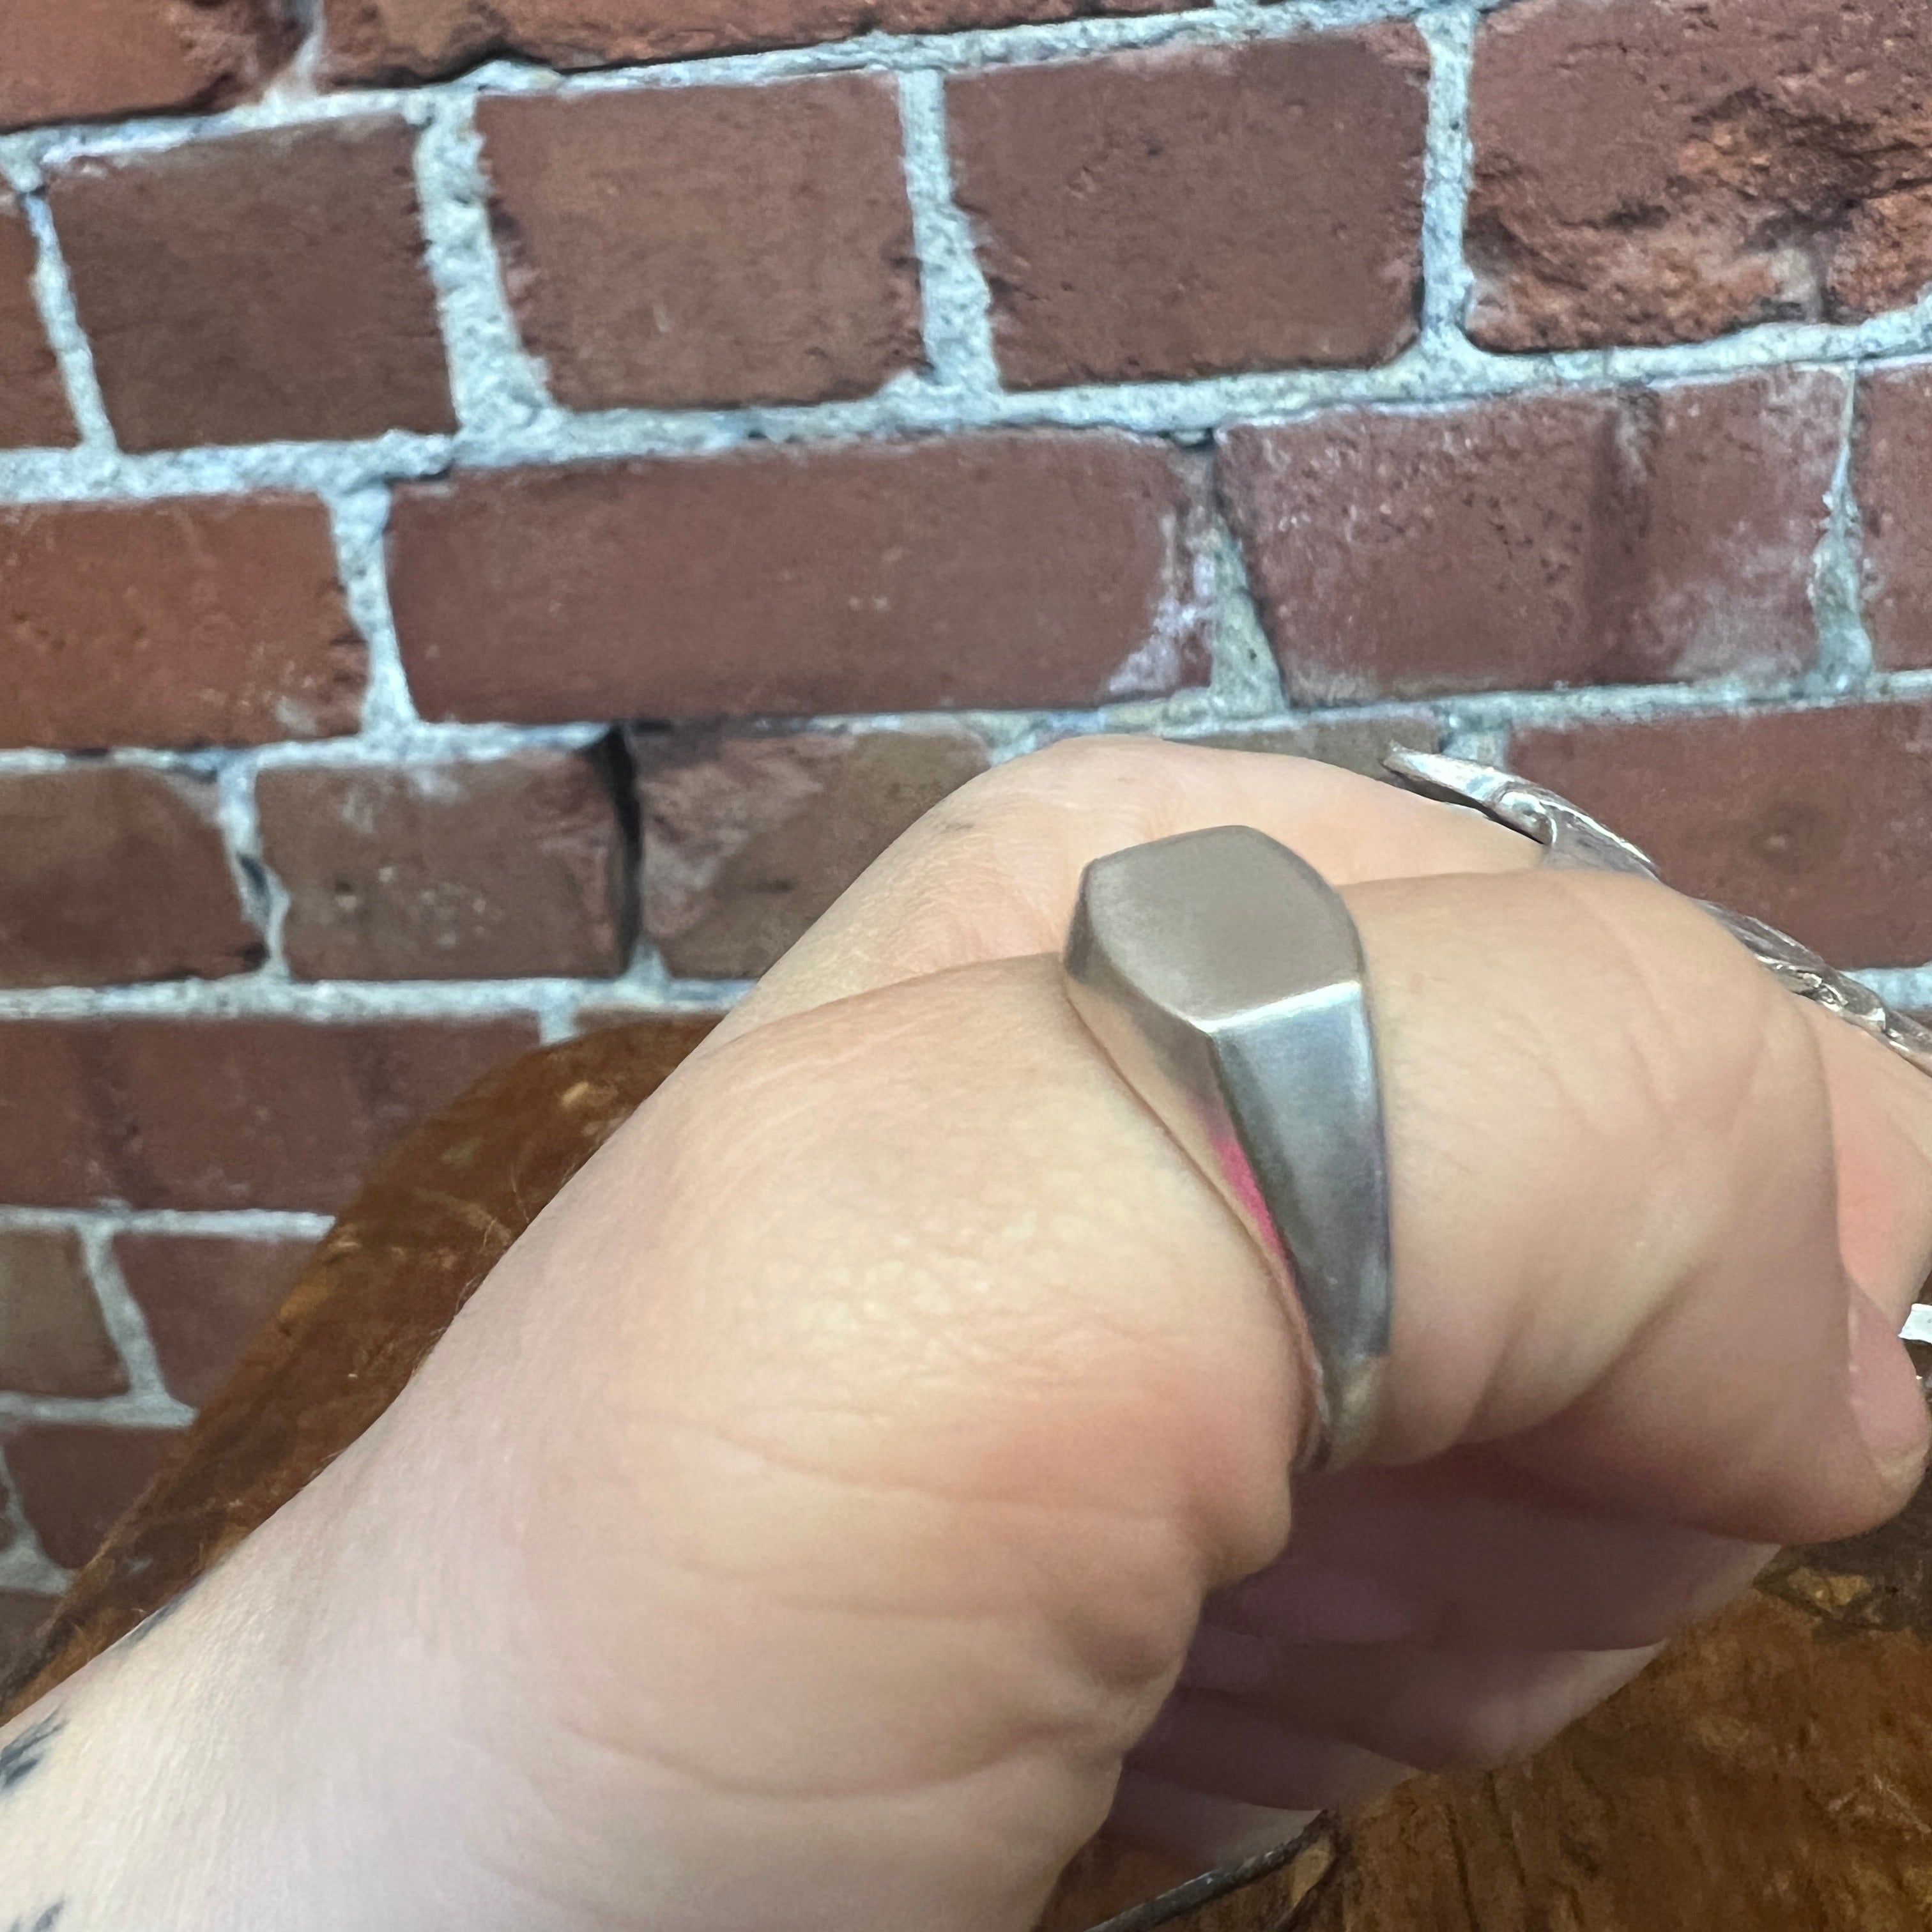 SGUCSIO sterling silver signet ring